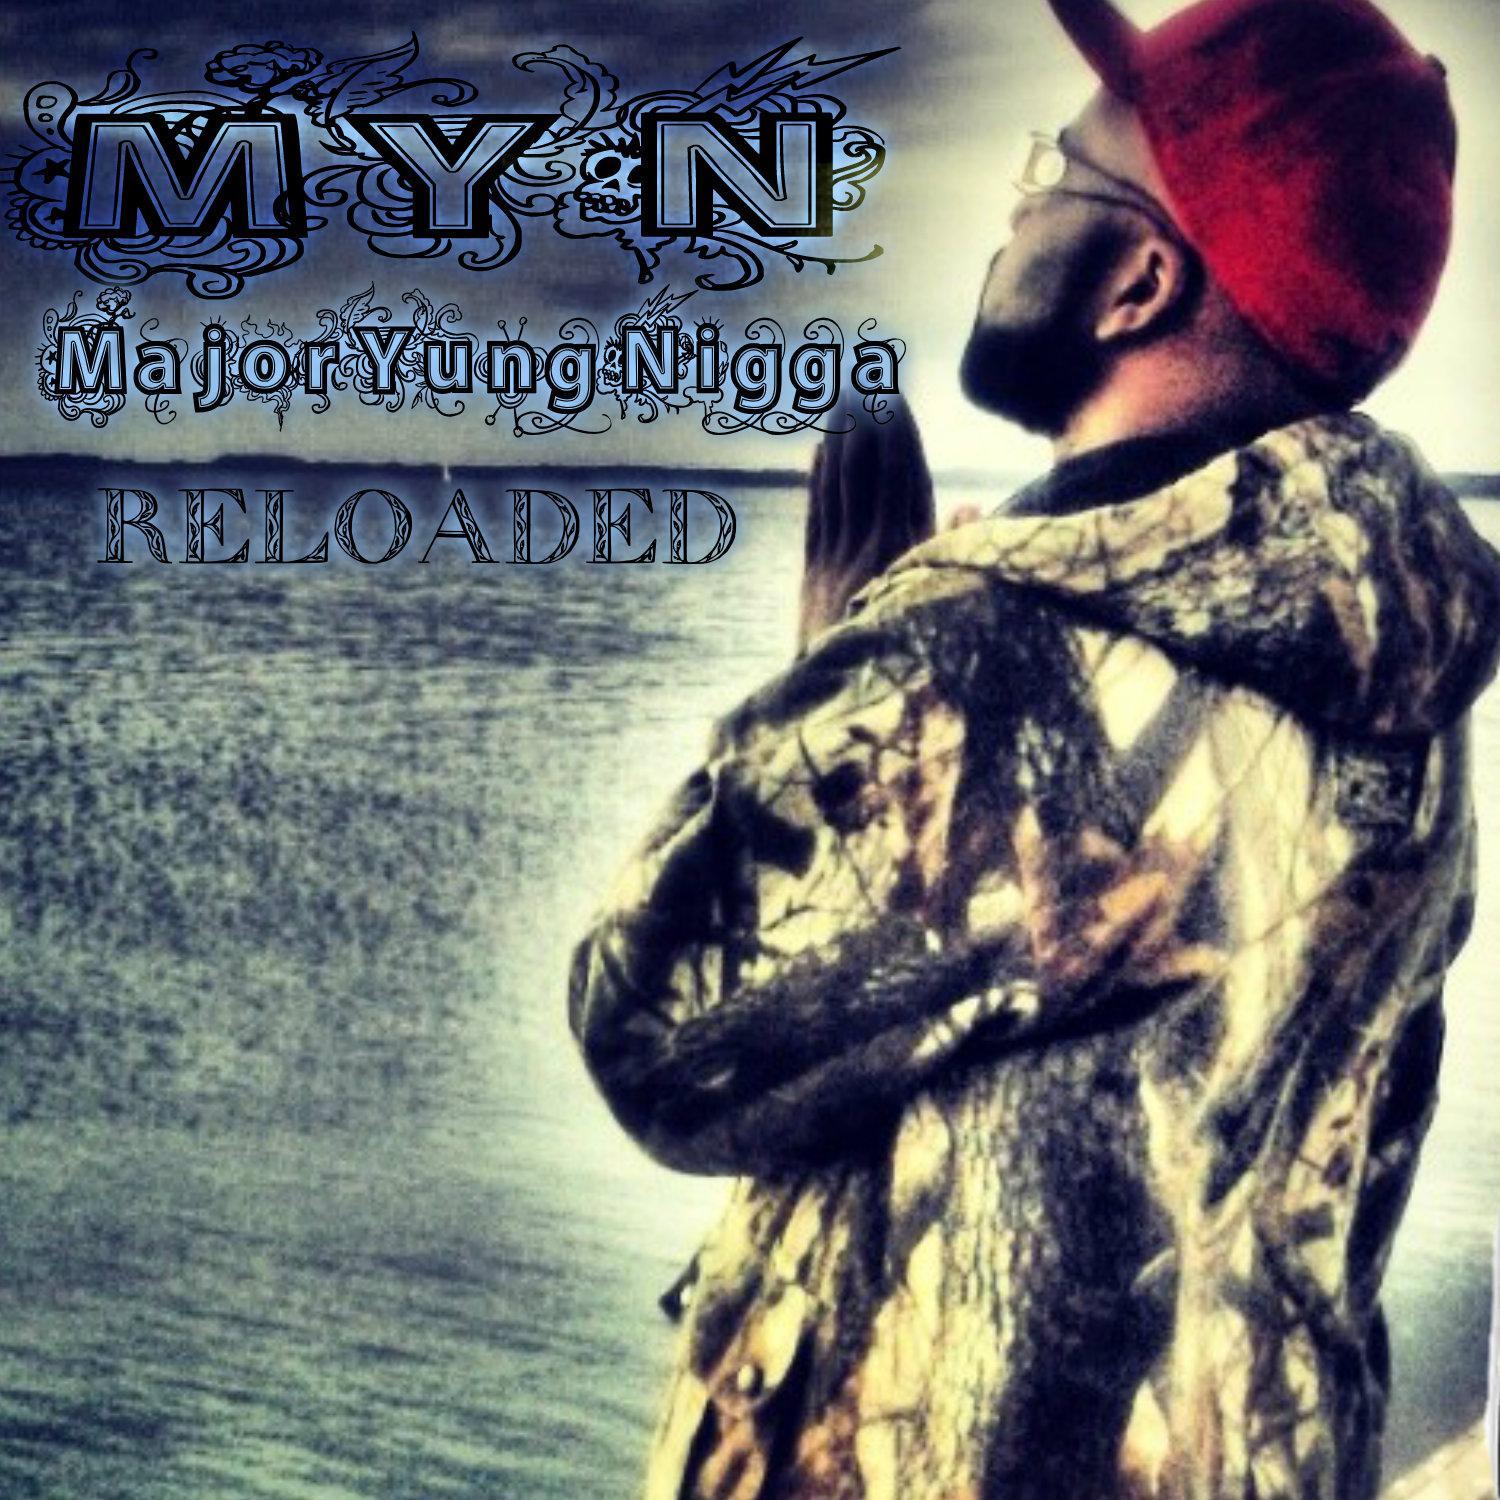 #MYN MajorYungNiggaReloaded Dropping Soon For Booking Info & Features Contact...PullUpGang @haywoodpullupgang@gmail.com Or Call {904}729-6757